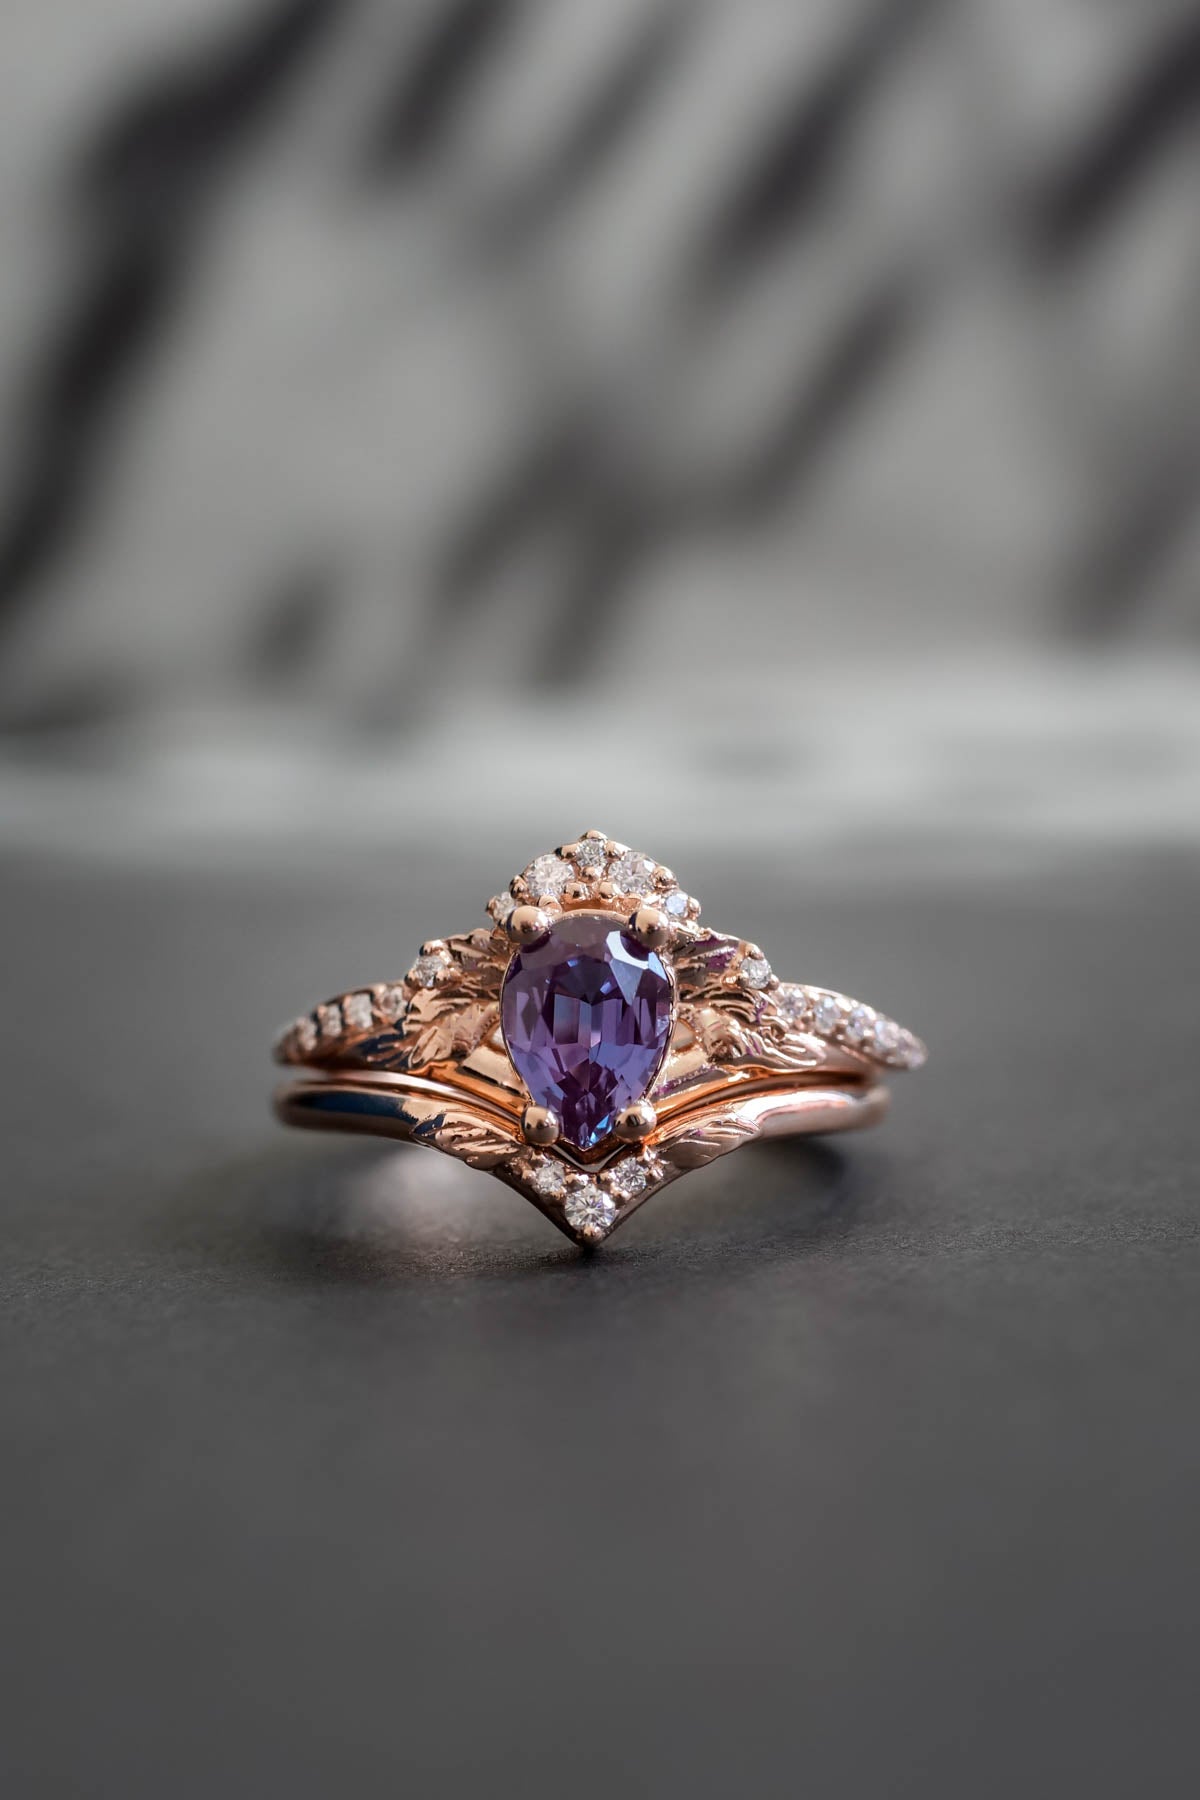 Engagement ring set with alexandrite, rose gold, pear cut . Unusual rose gold engagement rings